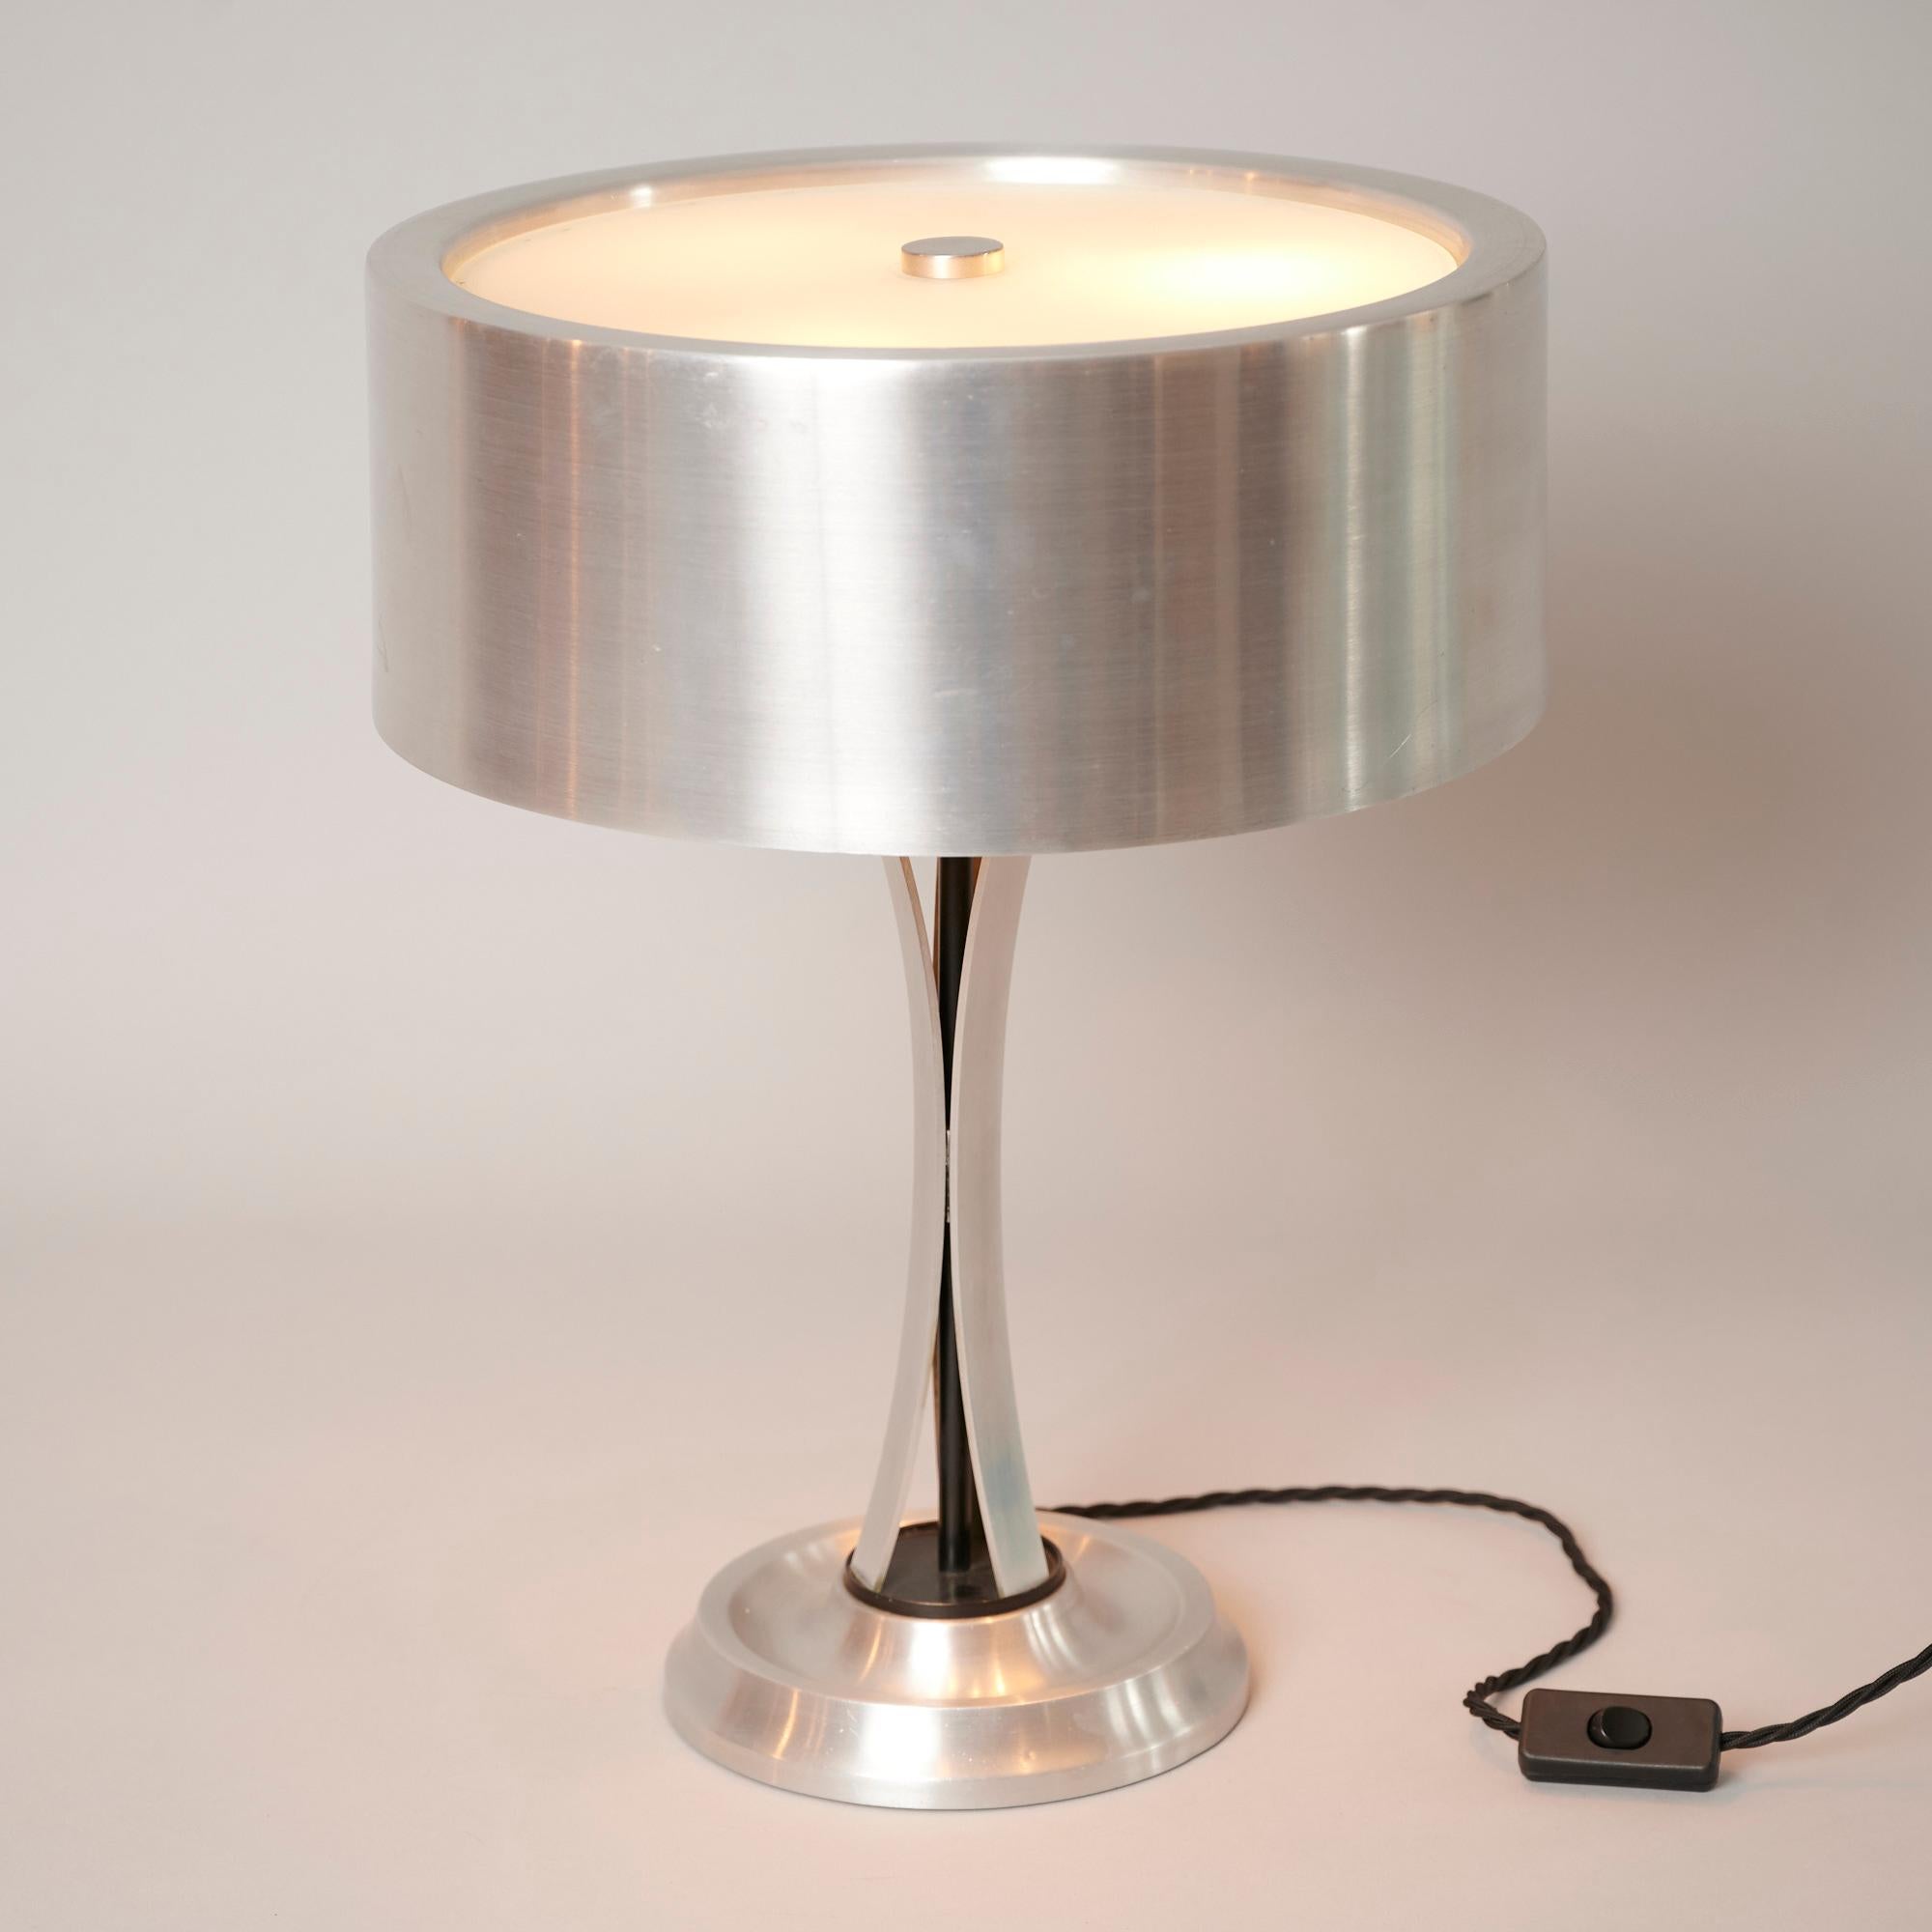 Brushed nickel table light with frosted glass by Oscar Torlasco.

Shade rotates and tilts to all angles...

Takes three ES candle bulbs. 

Re wired for Europe and US. (suitable plug needed for Europe and US).